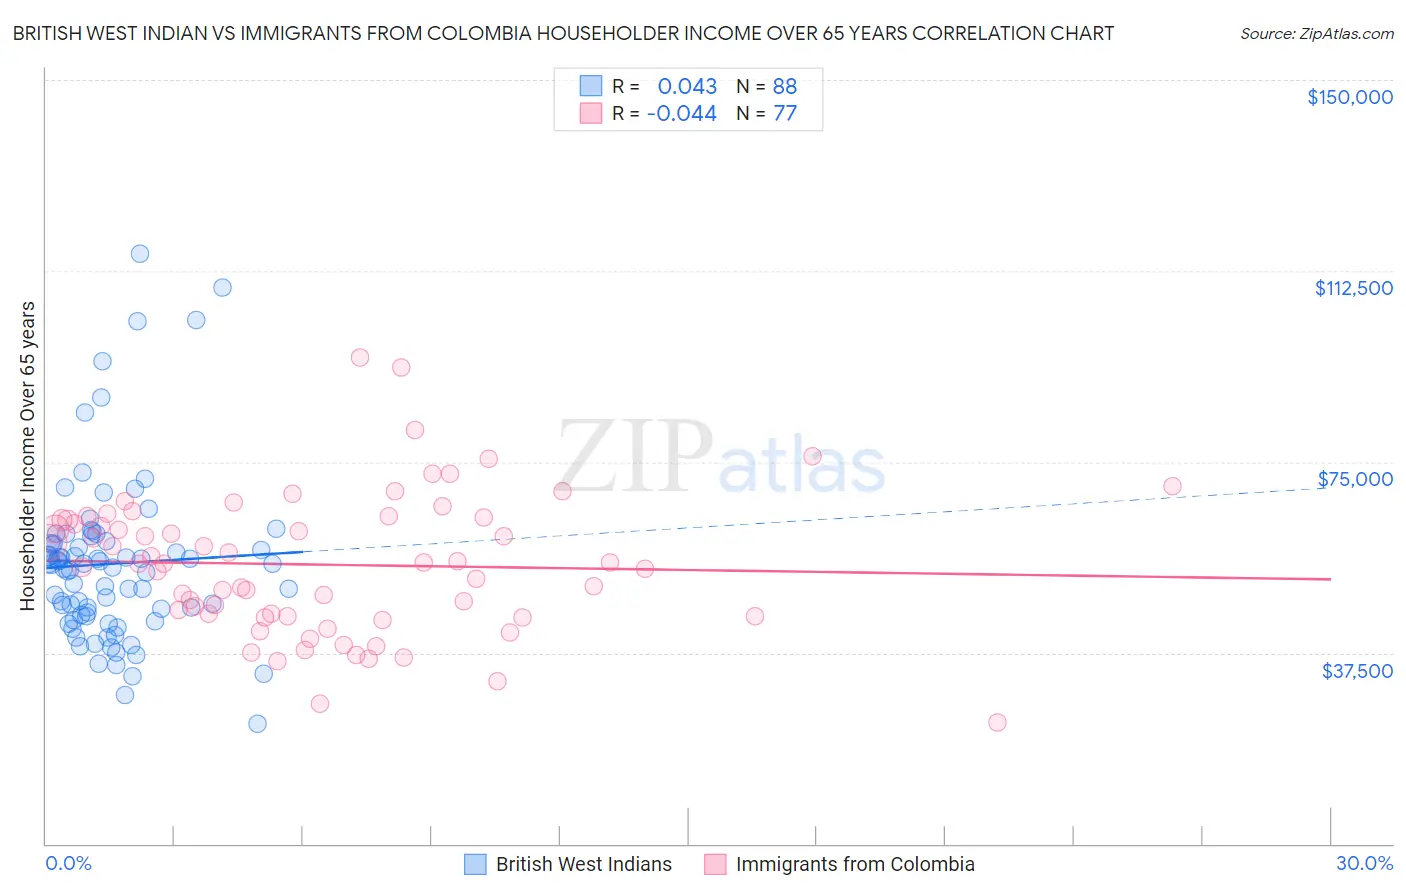 British West Indian vs Immigrants from Colombia Householder Income Over 65 years